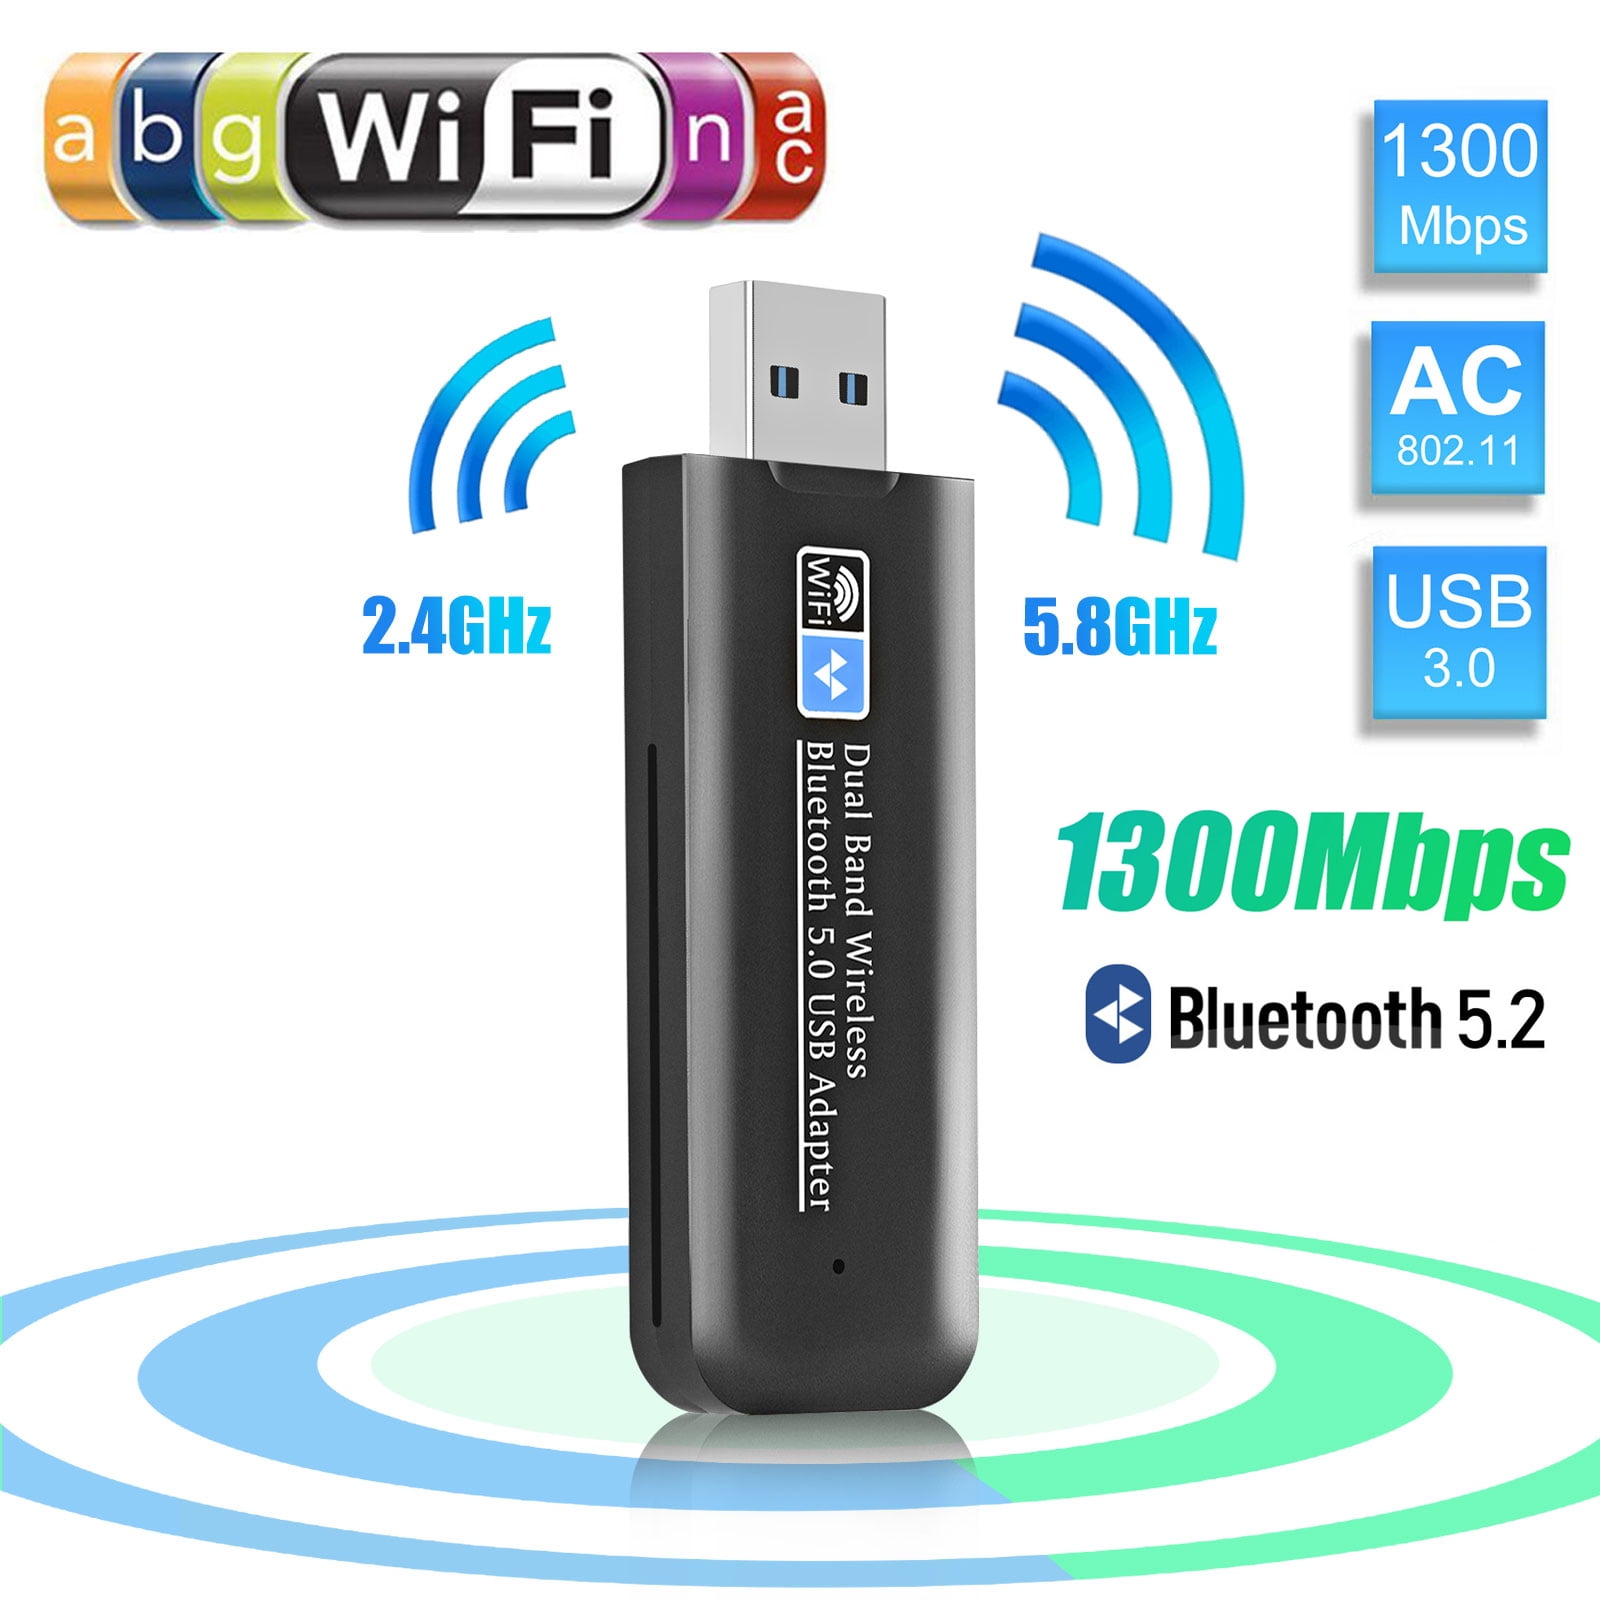 Usb Wifi Adapter For Desktop Pc Ac1300mbps Bluetooth 5 0 Usb 3 0 Wifi Dual Band Network Adapter With 2 4ghz 5ghz Dual 5dbi High Gain Antenna For Windows 10 8 1 8 7 Xp Linux Mac Os 10 9 10 15 Walmart Com